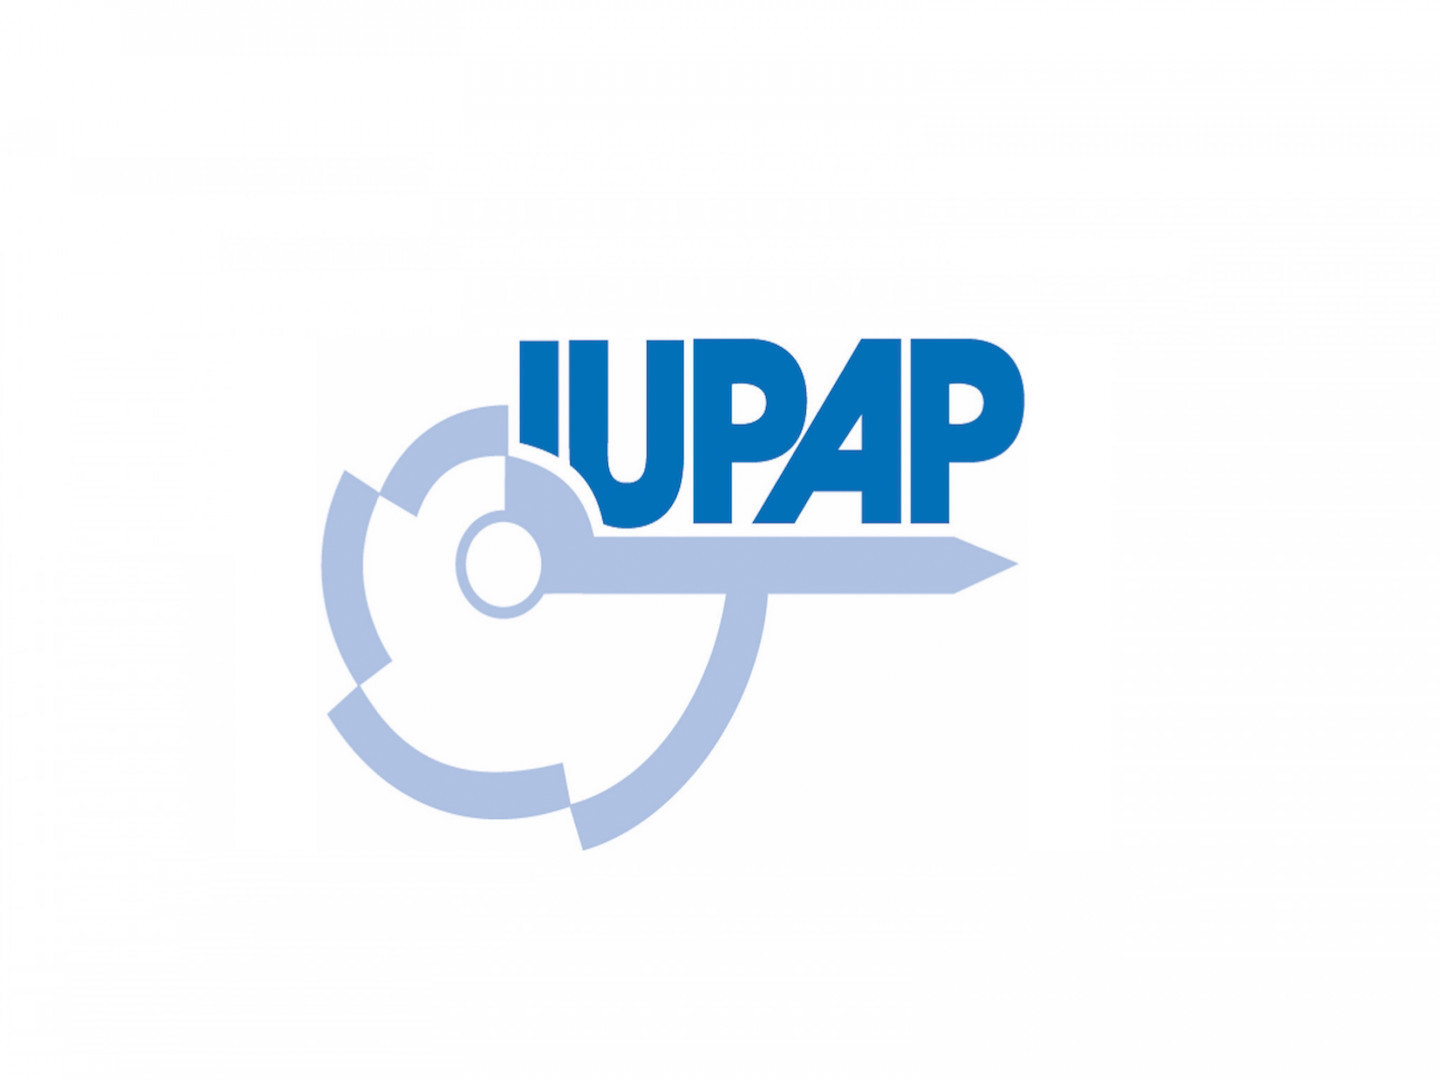  Early Career Prizes in Semiconductor Physics awarded by the IUPAP C8 Commission on Semiconductors 